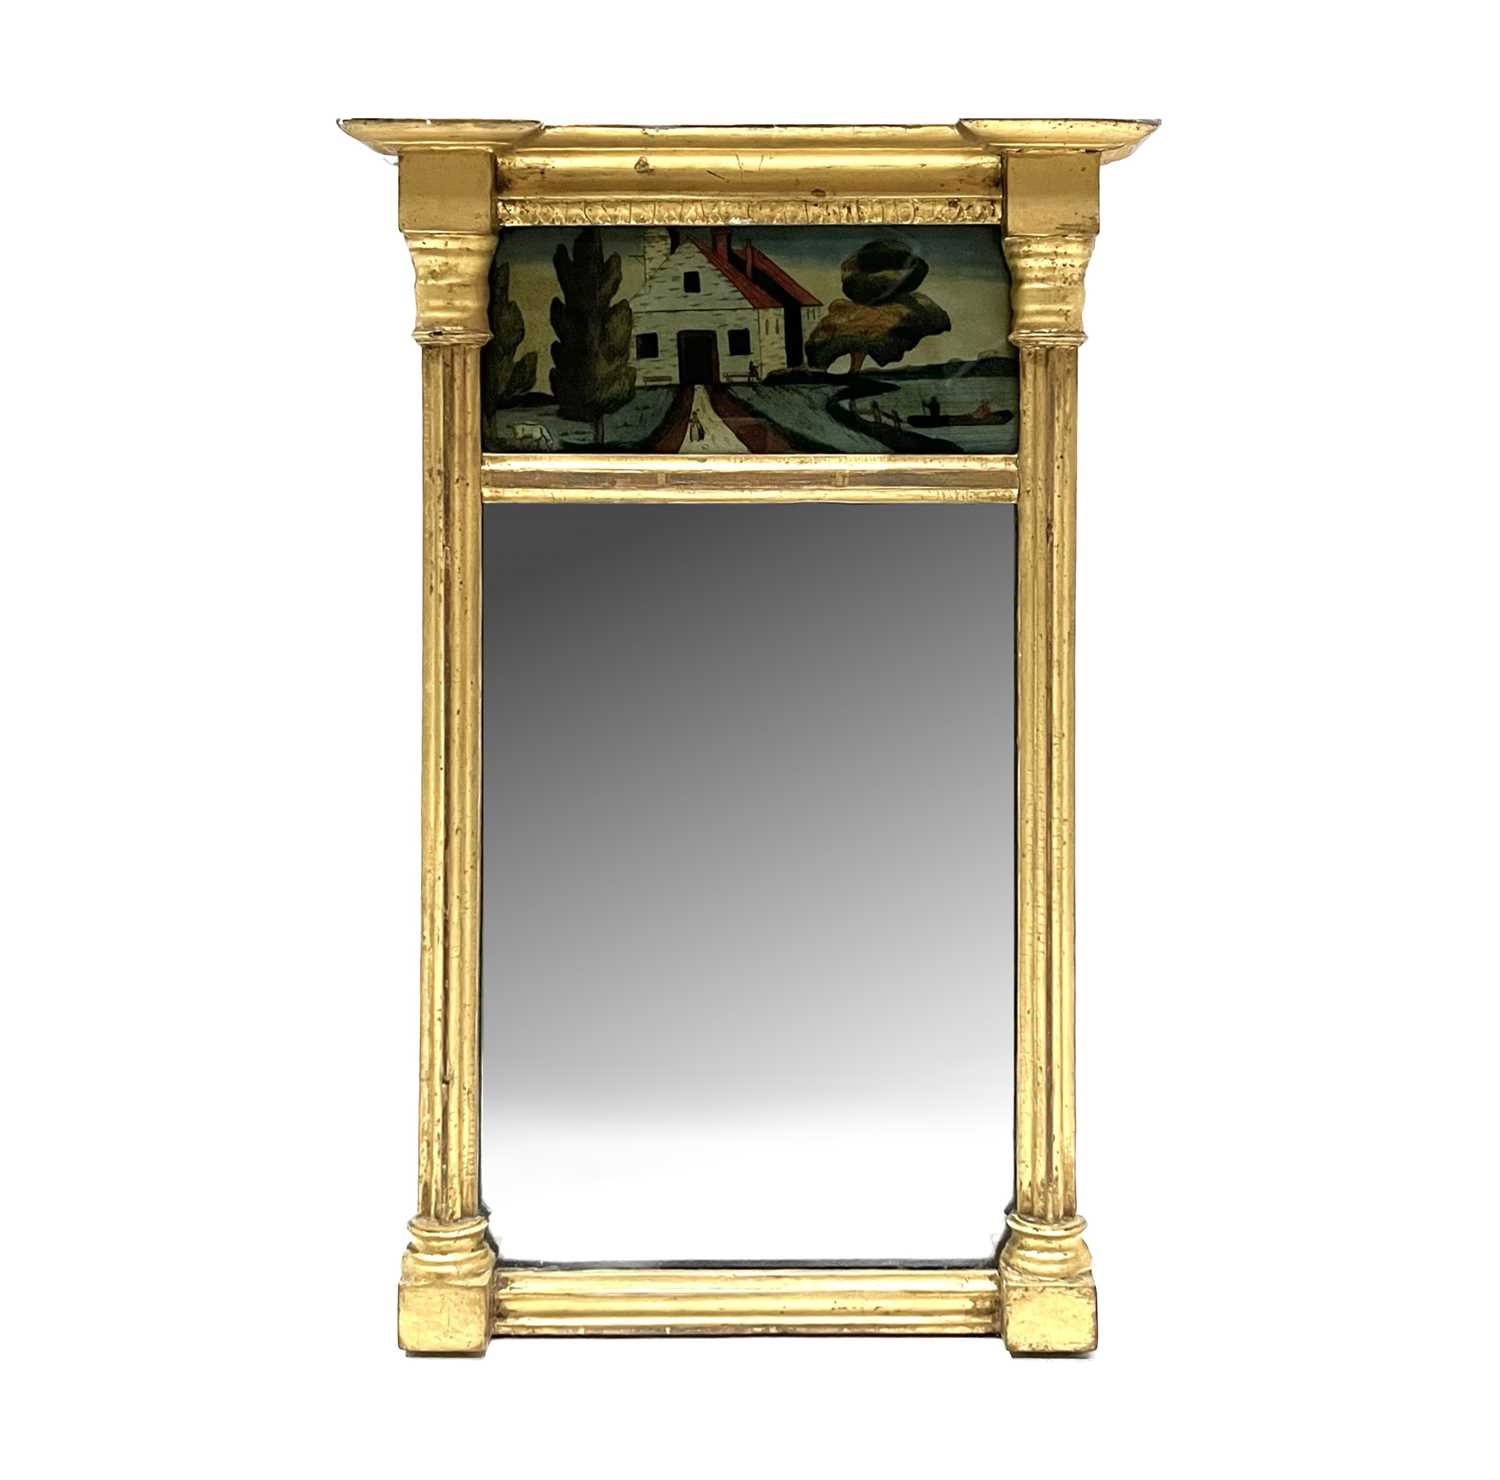 A Regency giltwood pier glass of small proportions, circa 1820, projecting cornice, the frieze